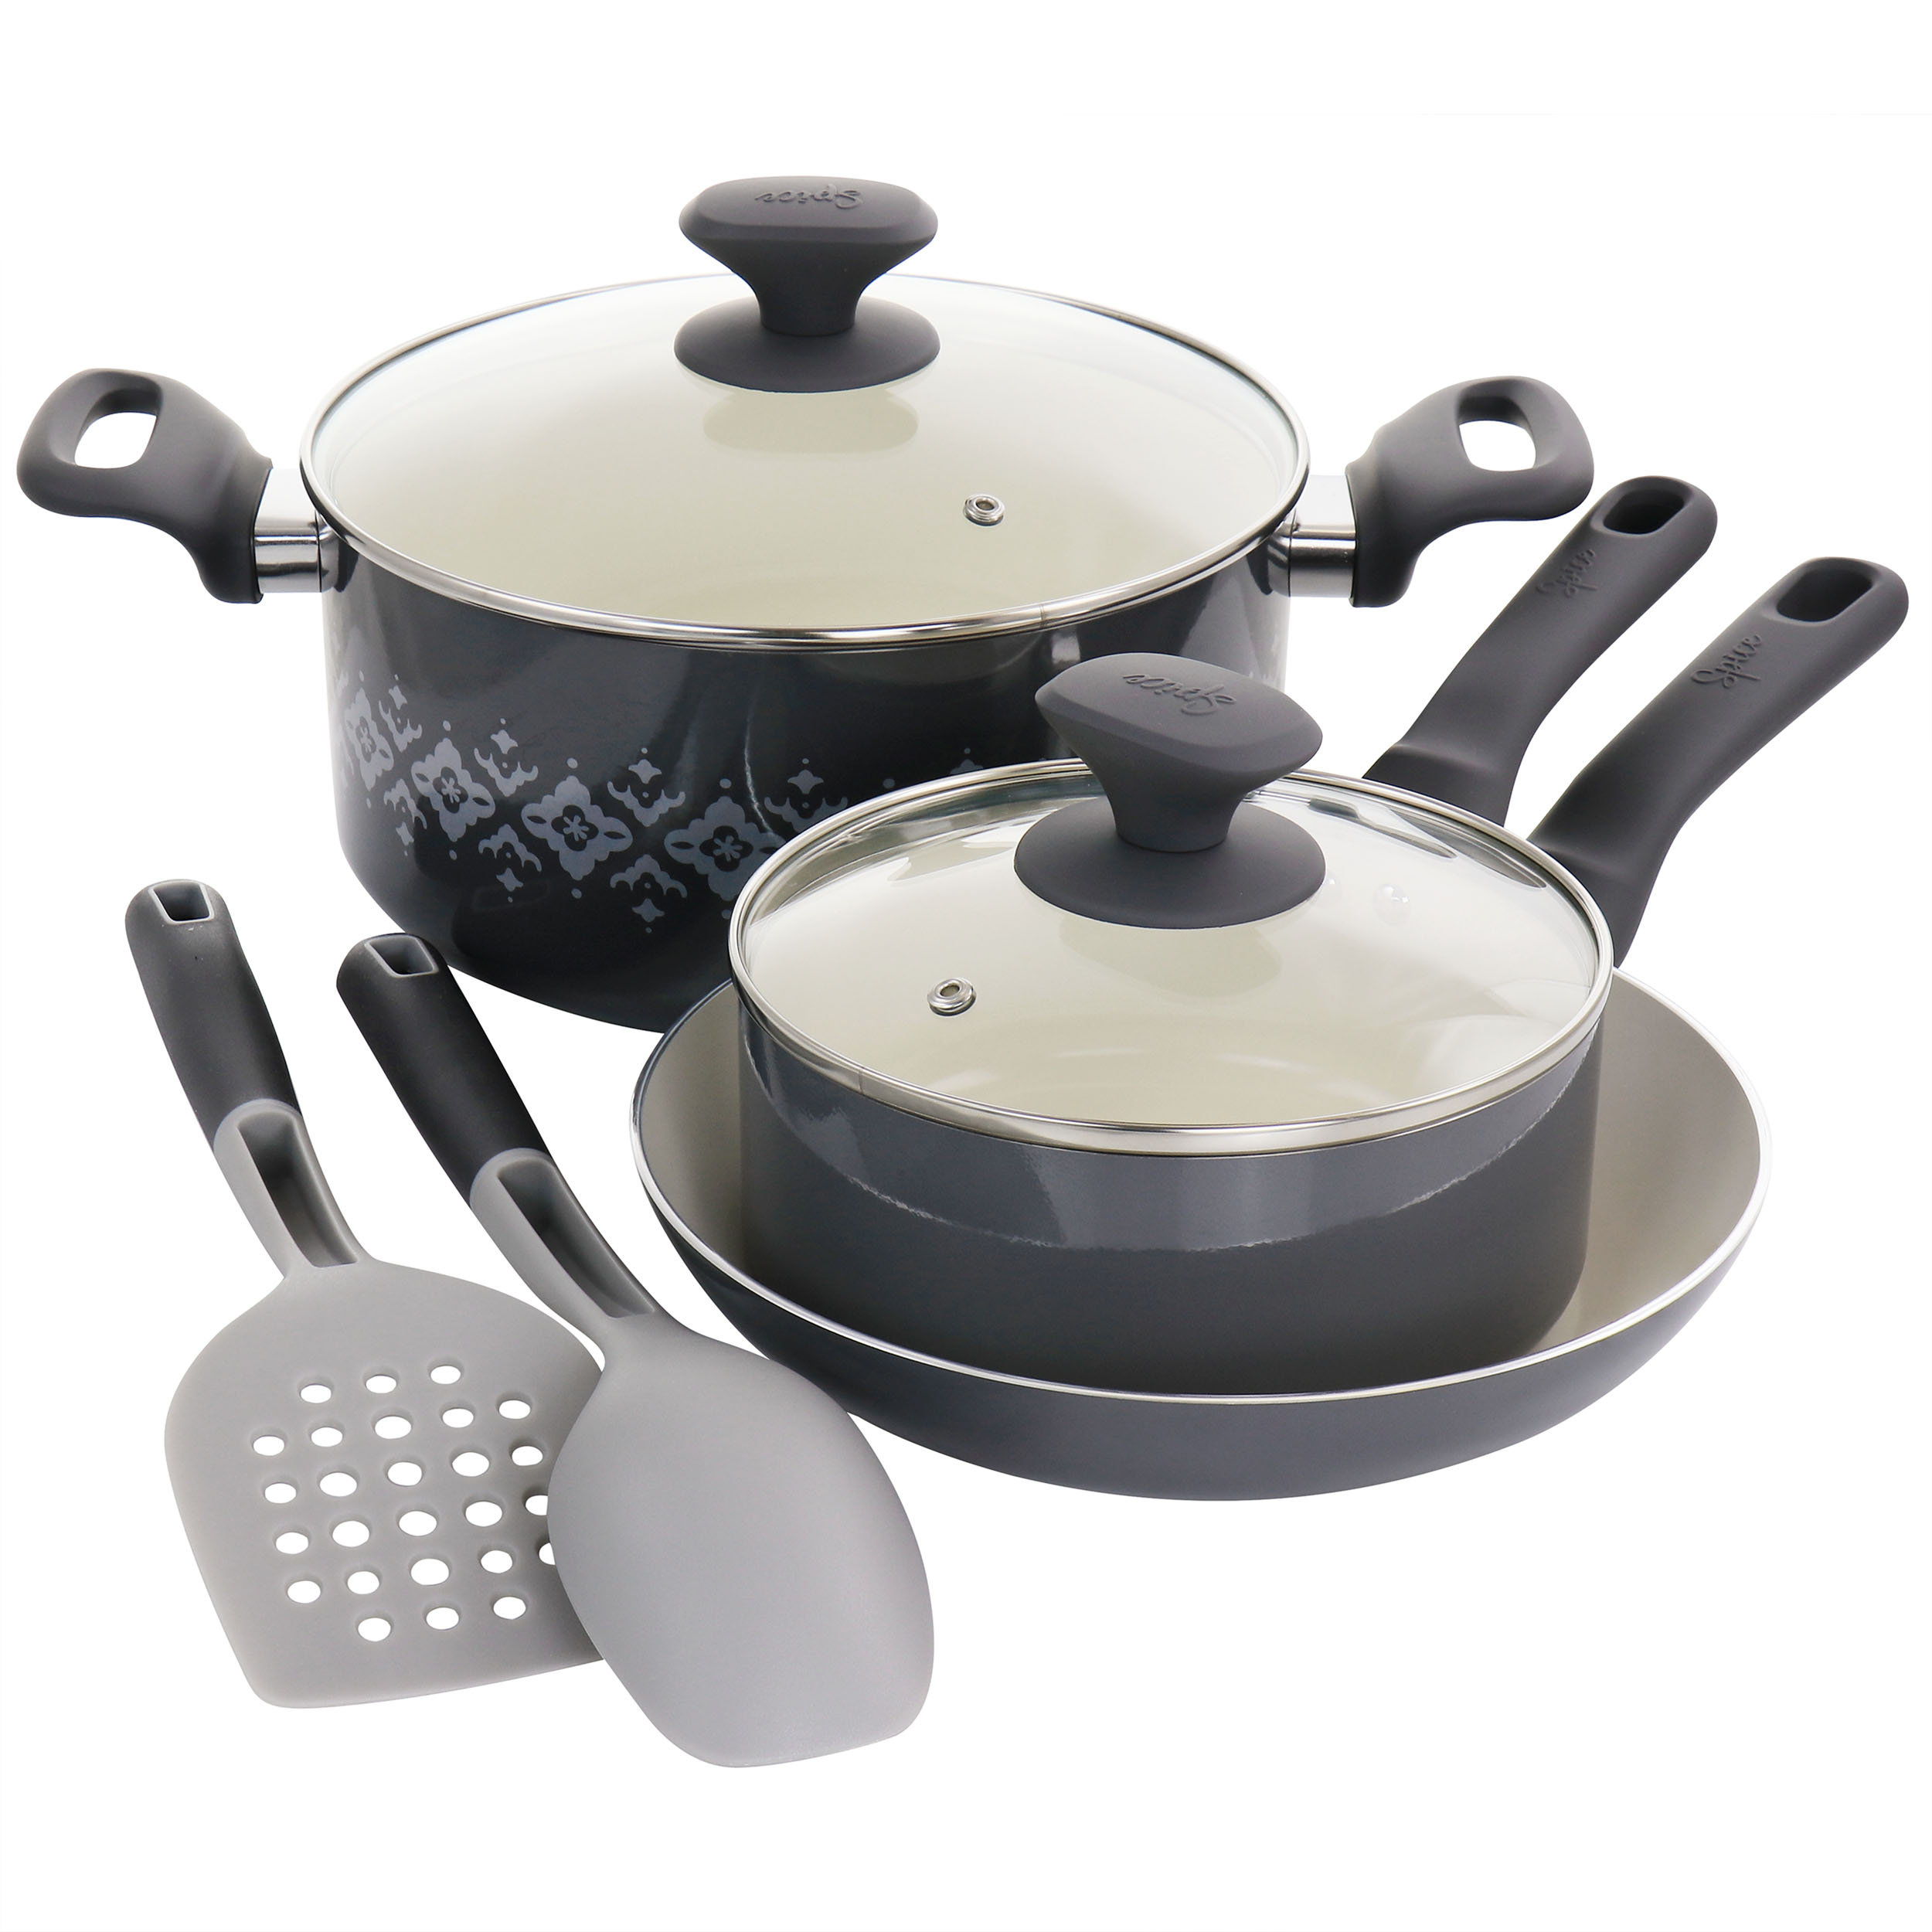 Spice by Tia Mowry - Nonstick Ceramic 10PC Charcoal Aluminum Cookware Set 